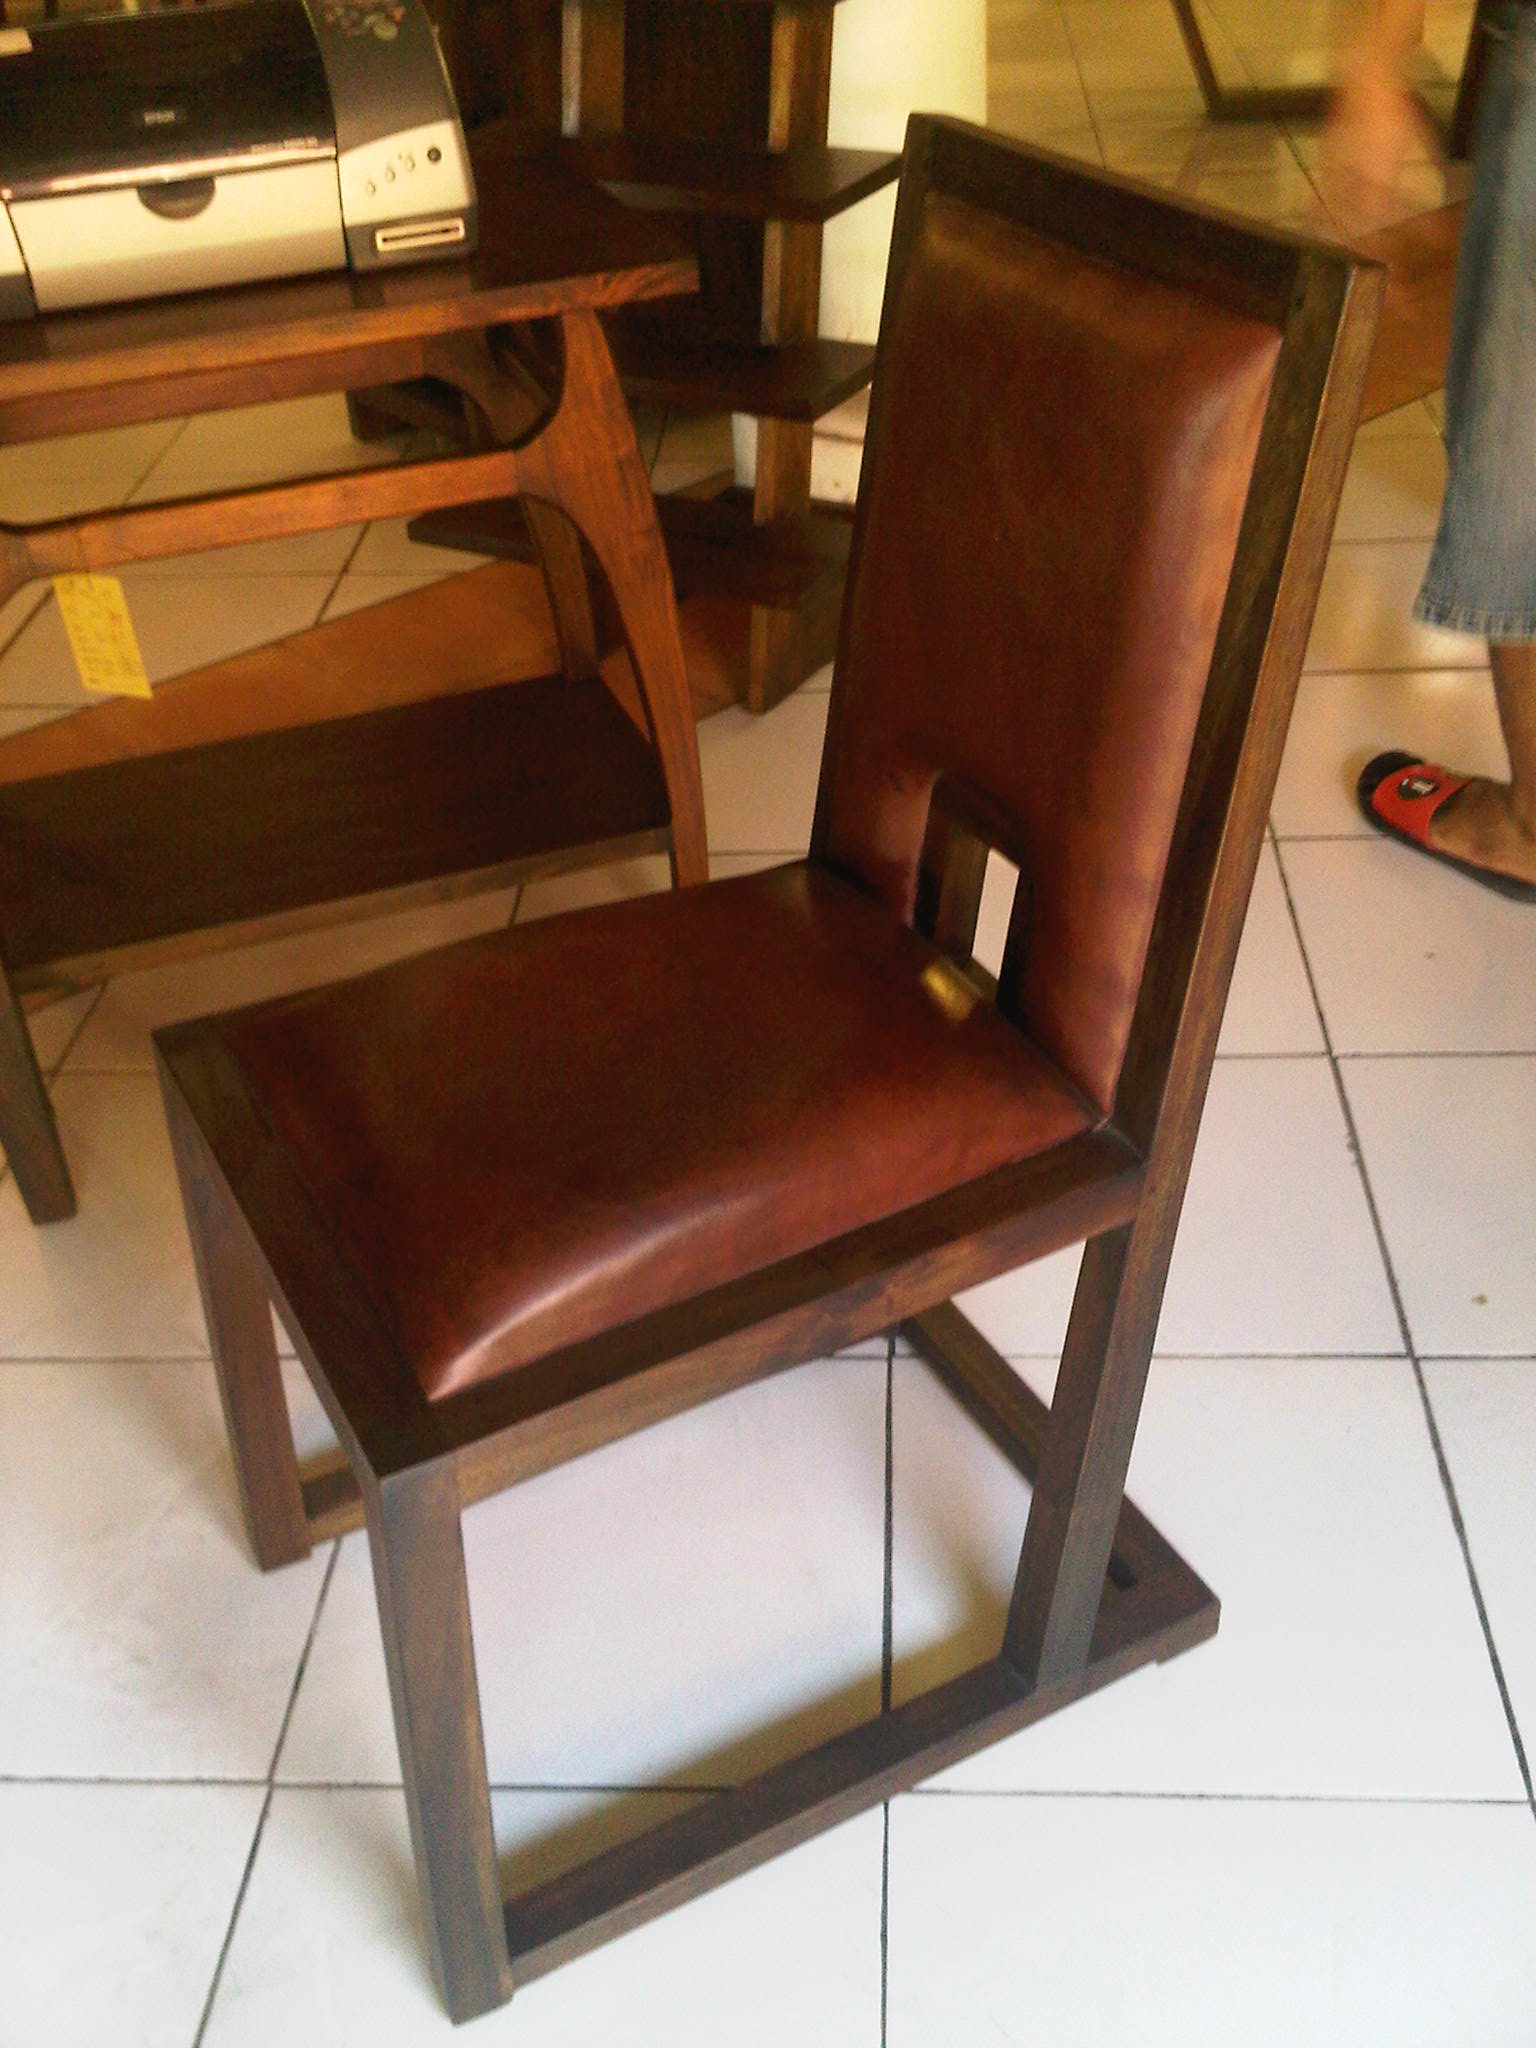 Teak wood with leather